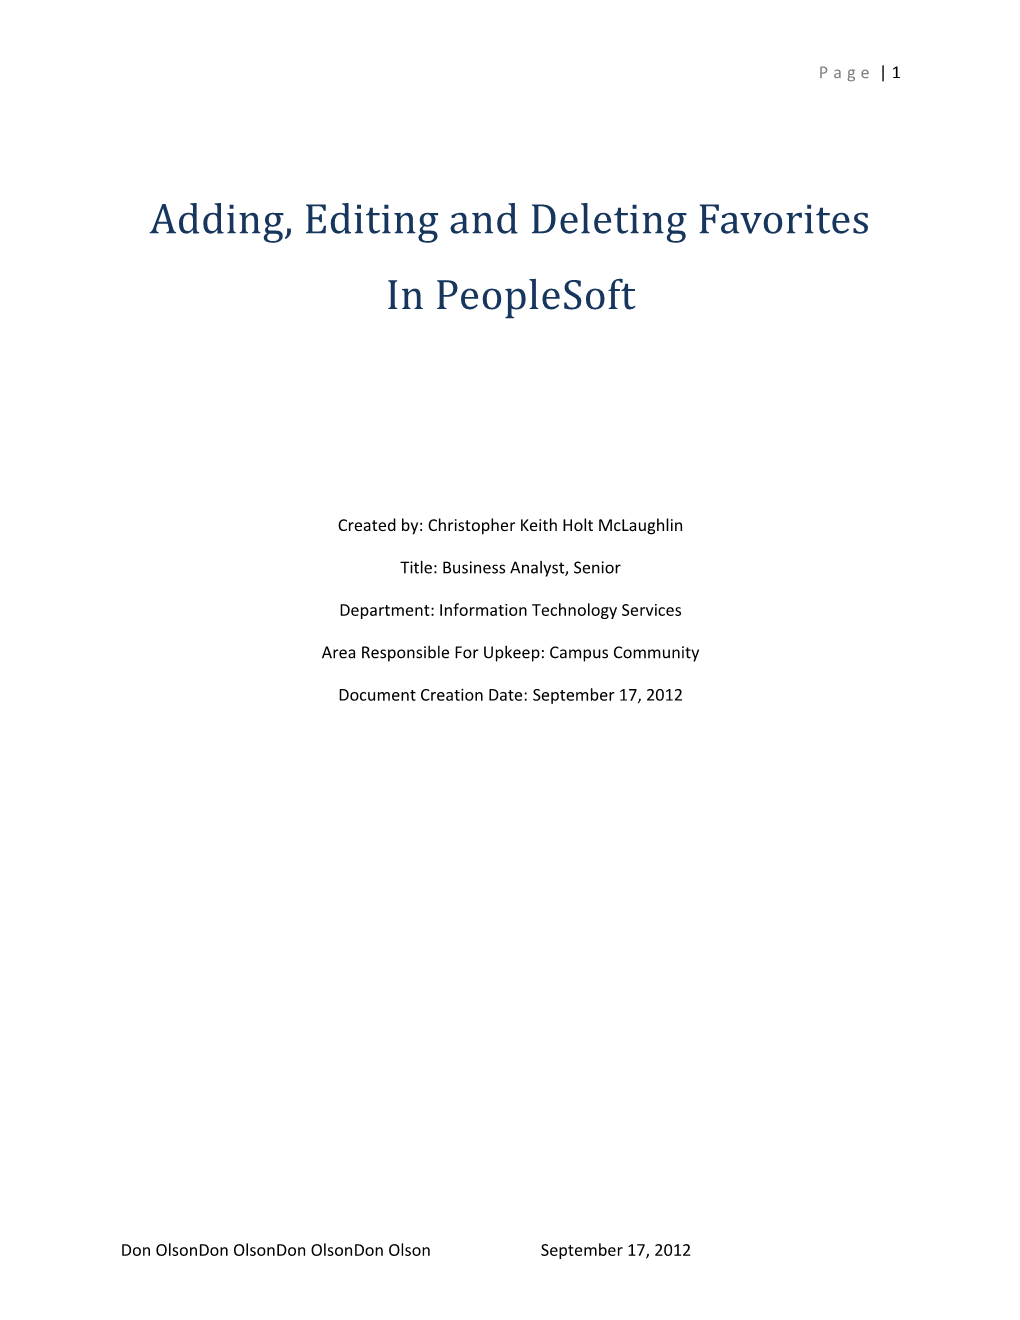 Adding, Editing, And Deleting Favorites In Peoplesoft